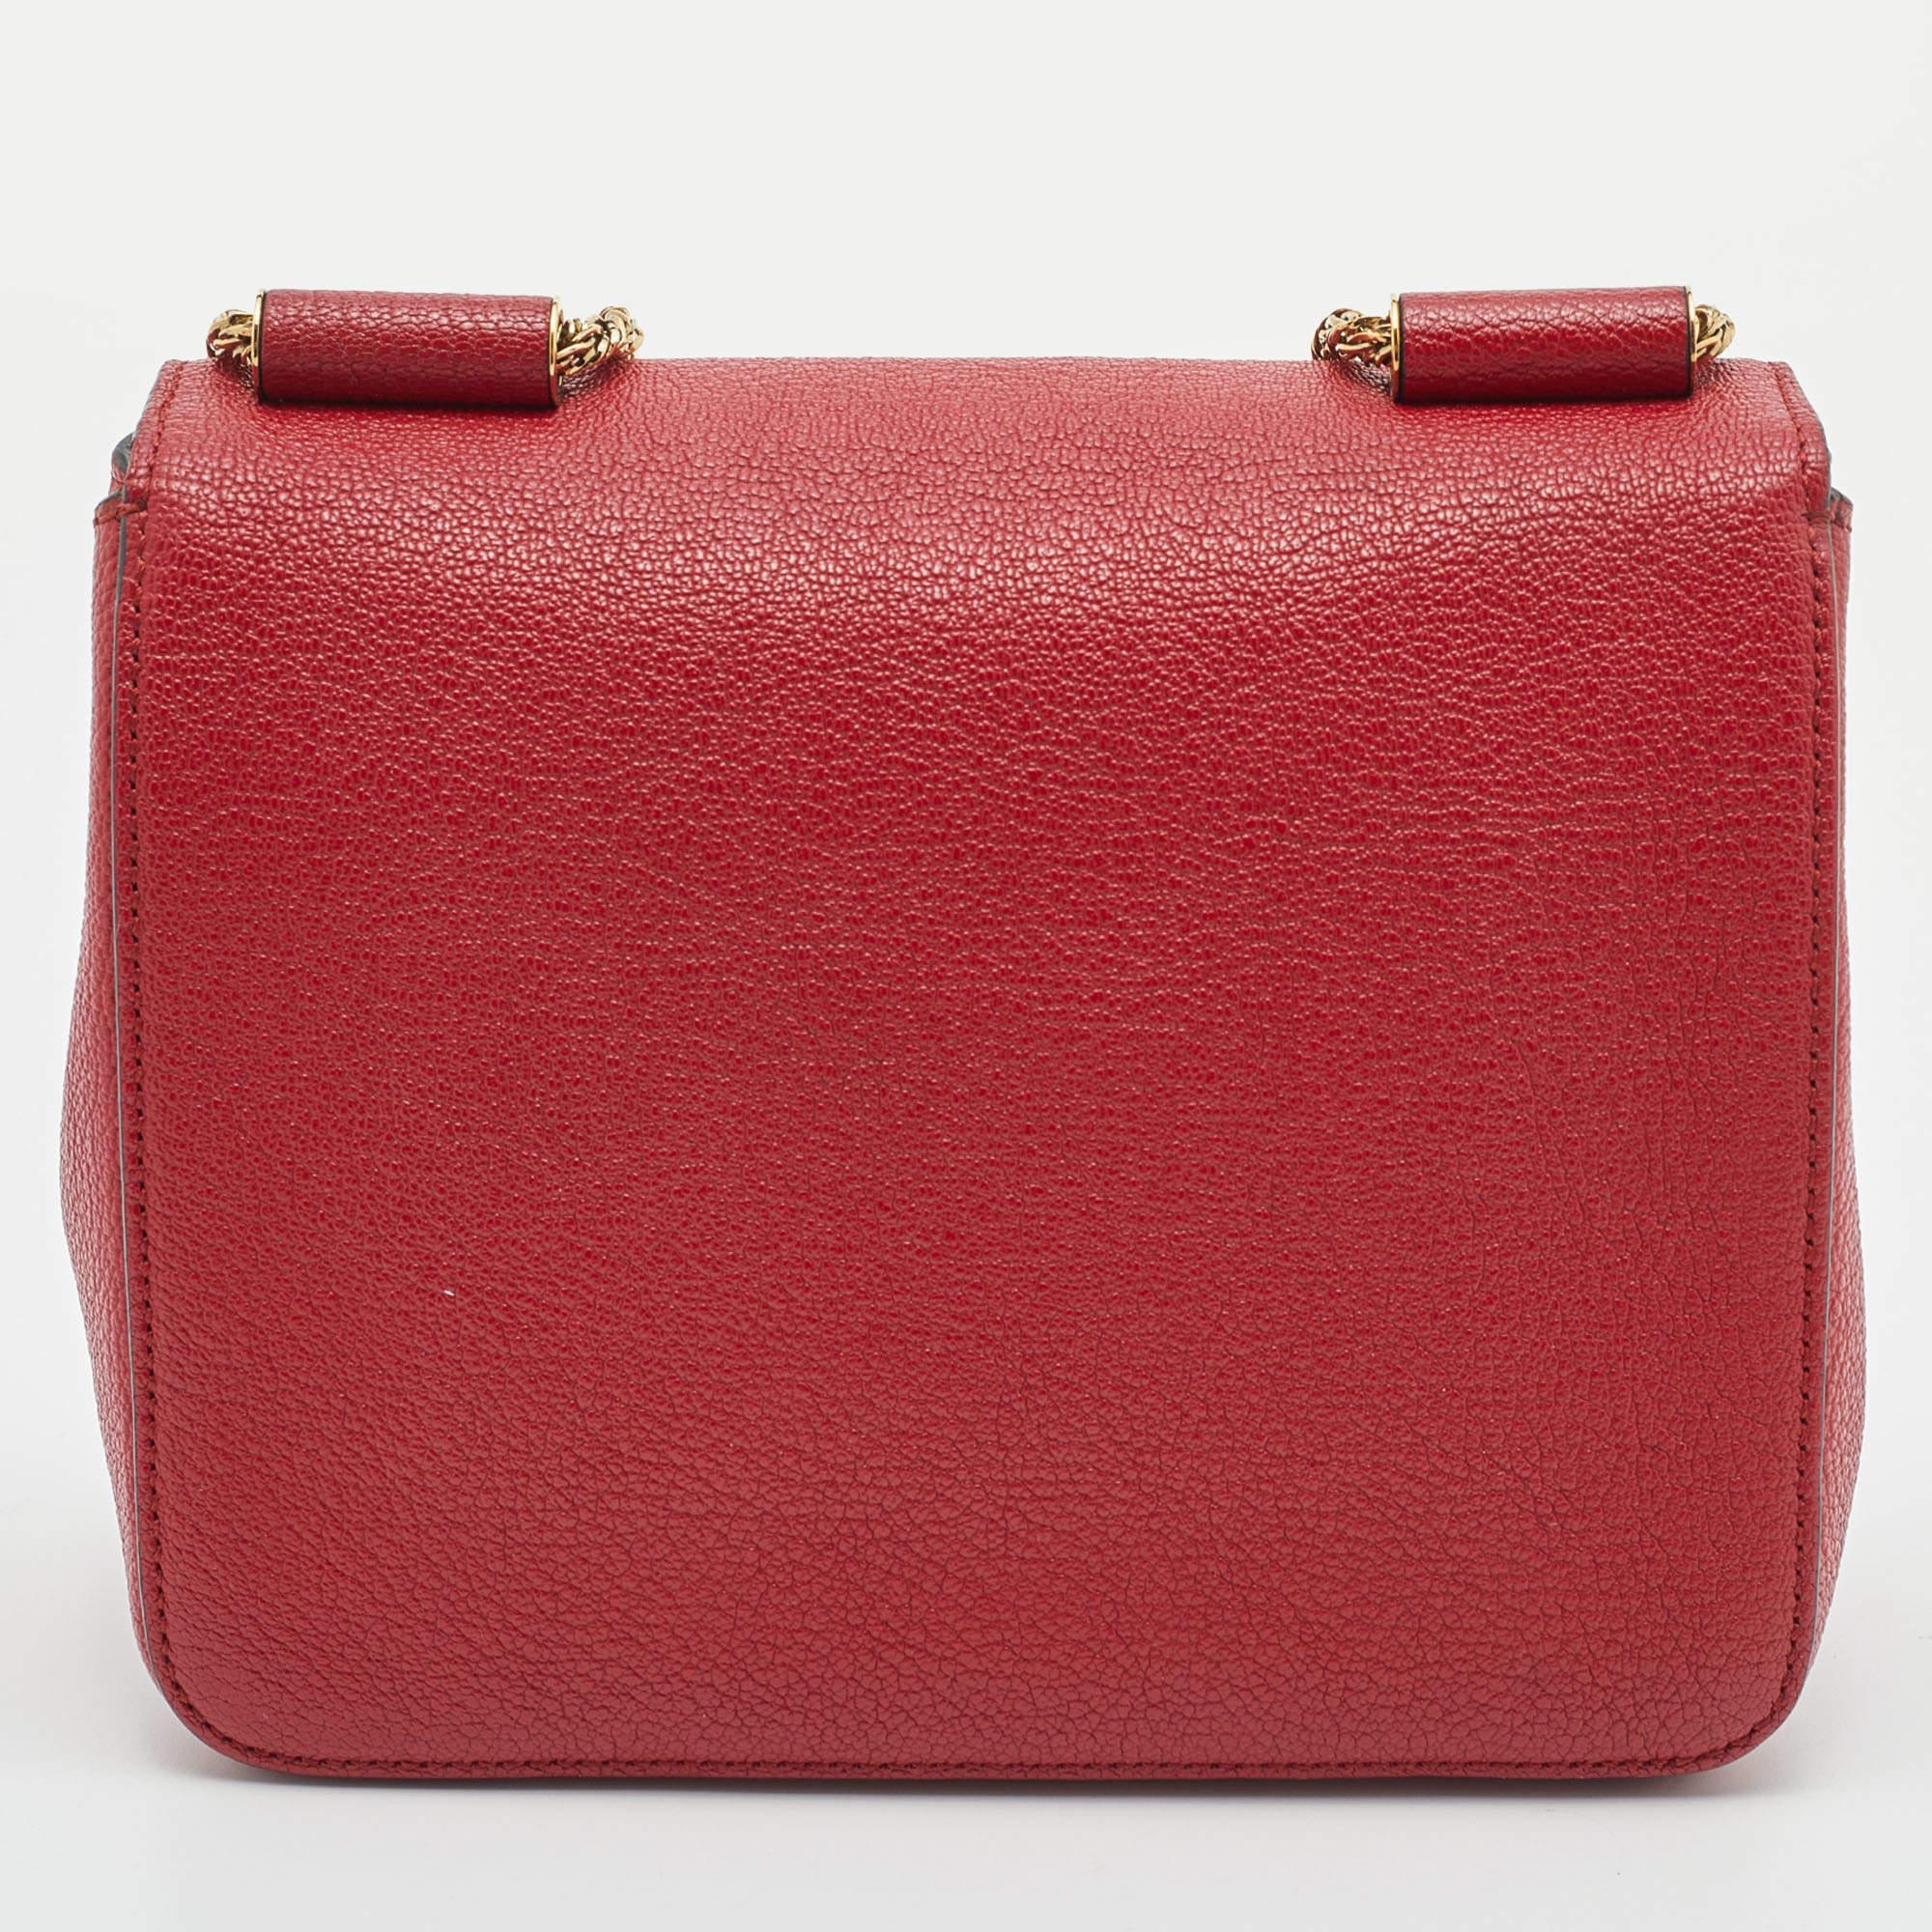 This Elsie shoulder bag from Chloé is both elegant and fashionable. Crafted from red leather, this bag features a chain strap, gold-tone hardware, and a spacious leather-lined interior. A logo-engraved lock closure highlights the front. Make this